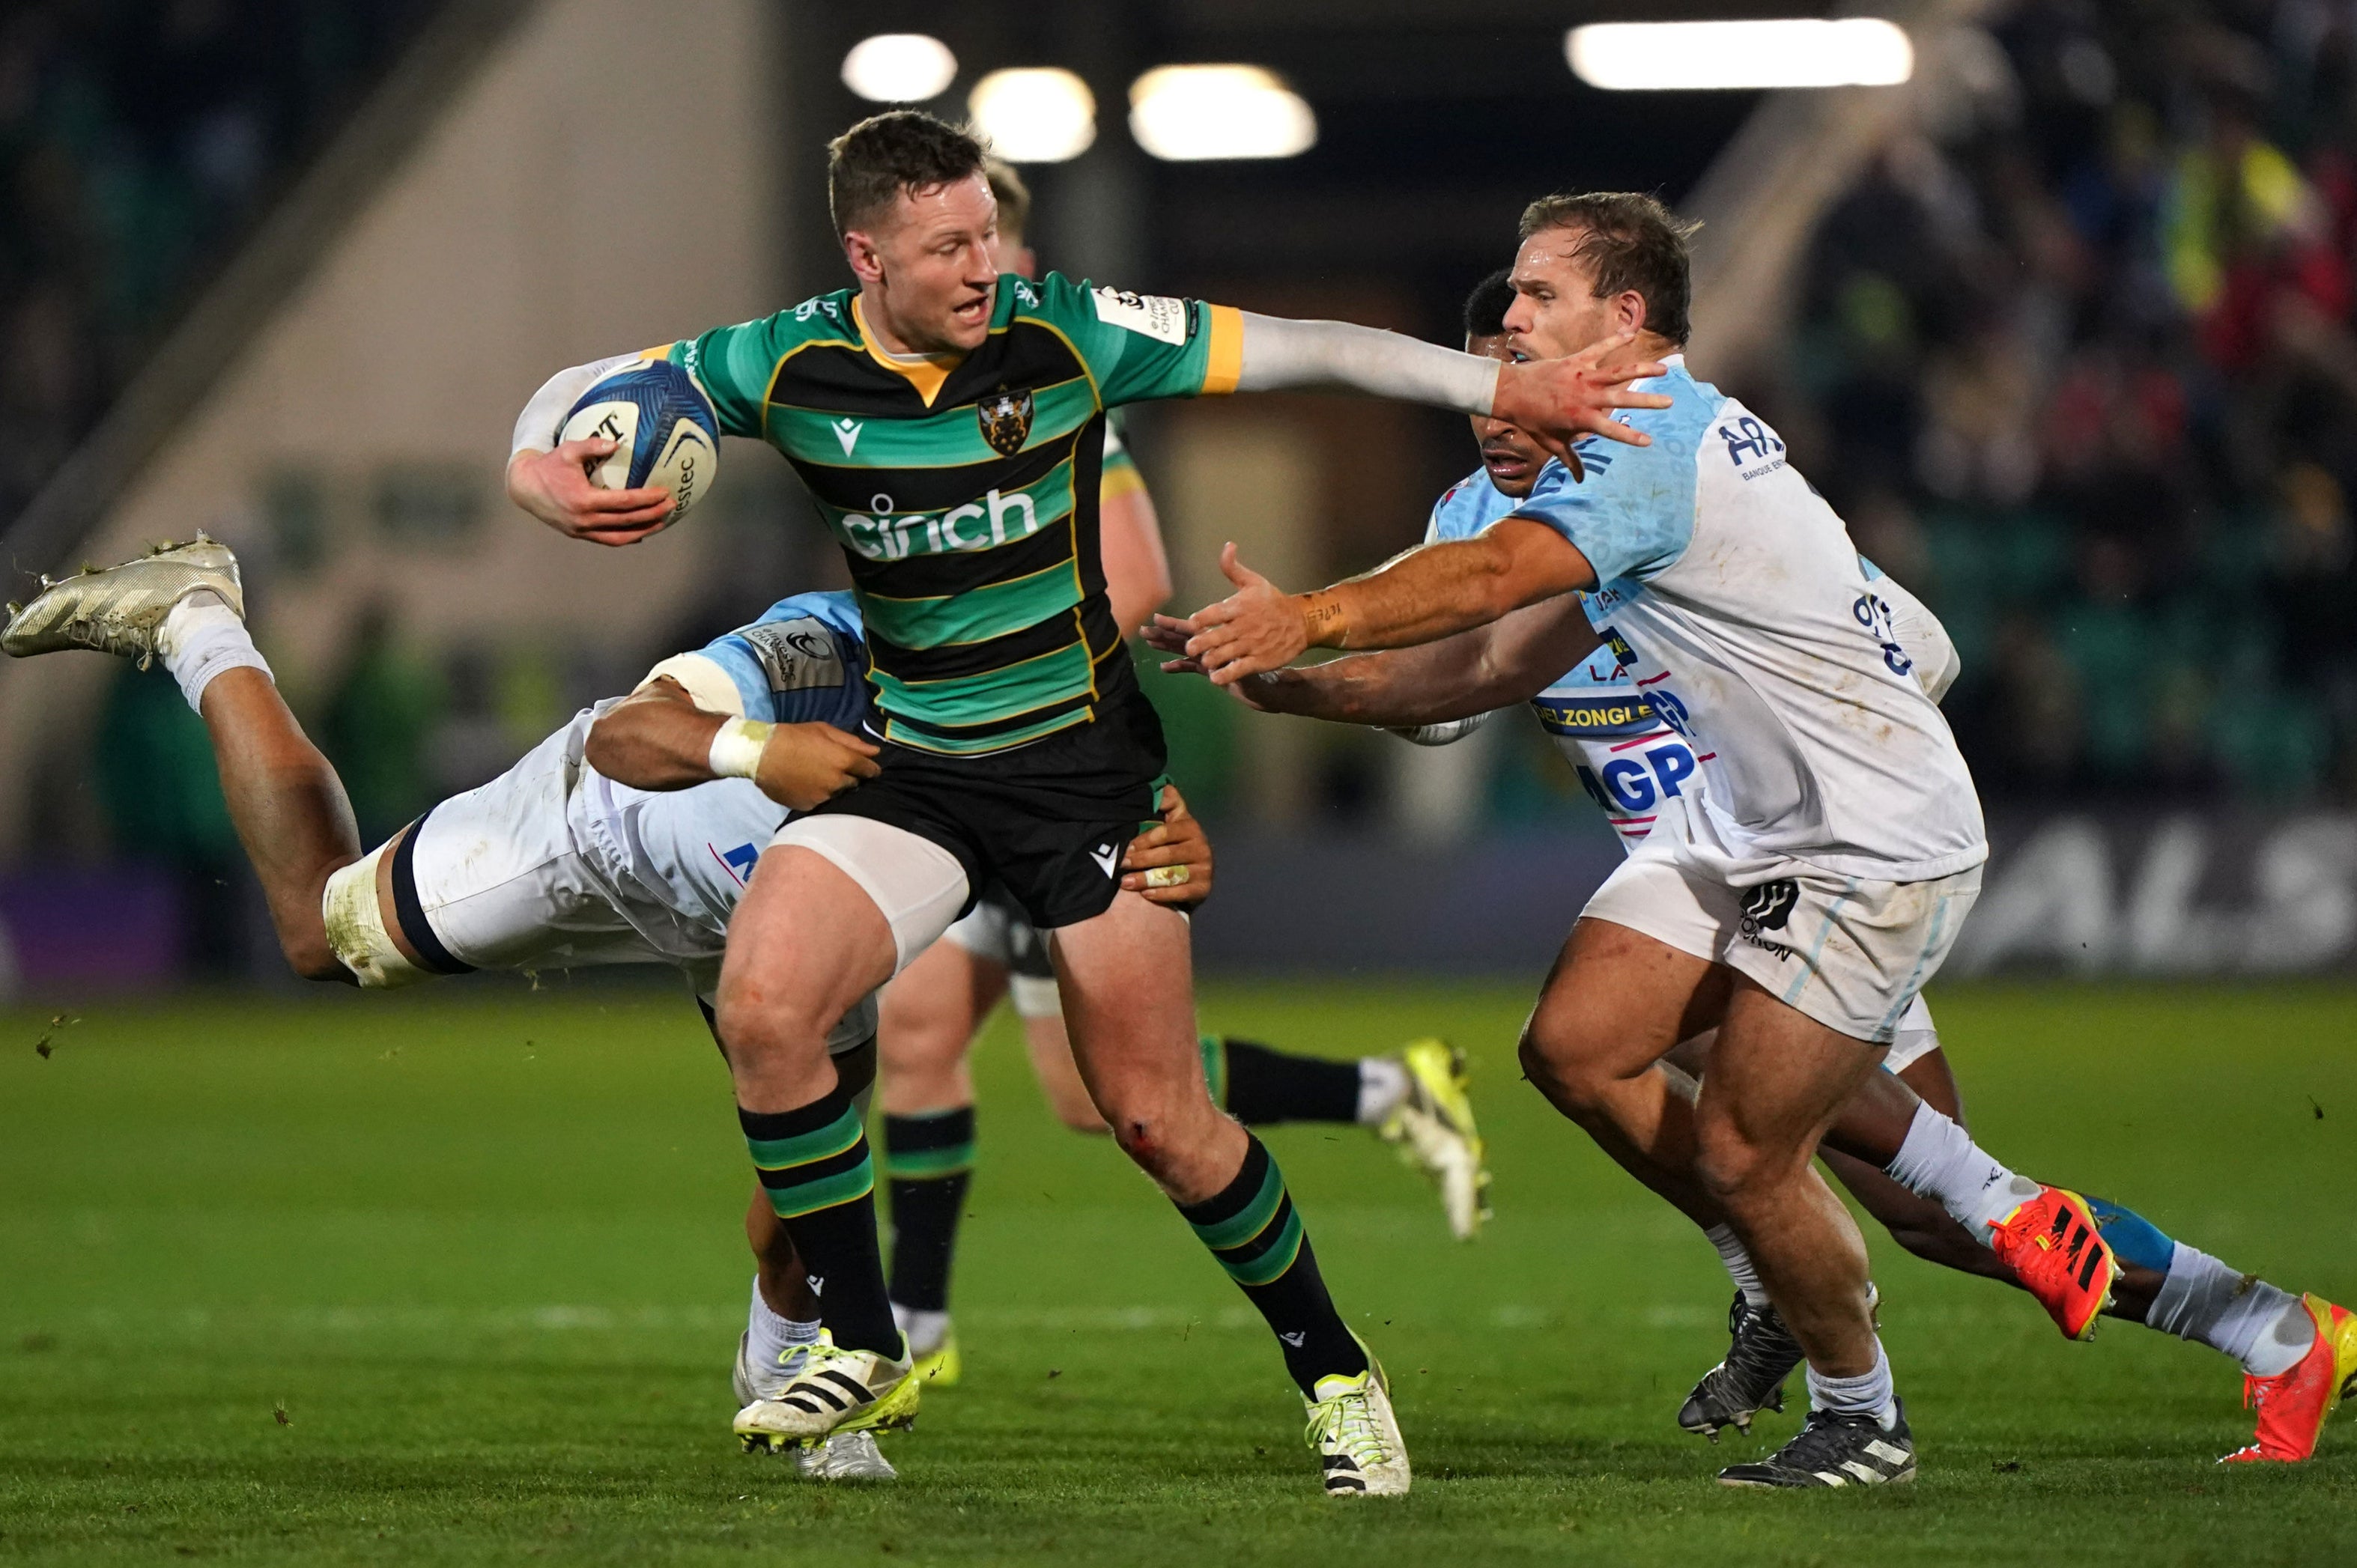 Fraser Dingwall has made more metres per carry than any other player in the Champions Cup this year